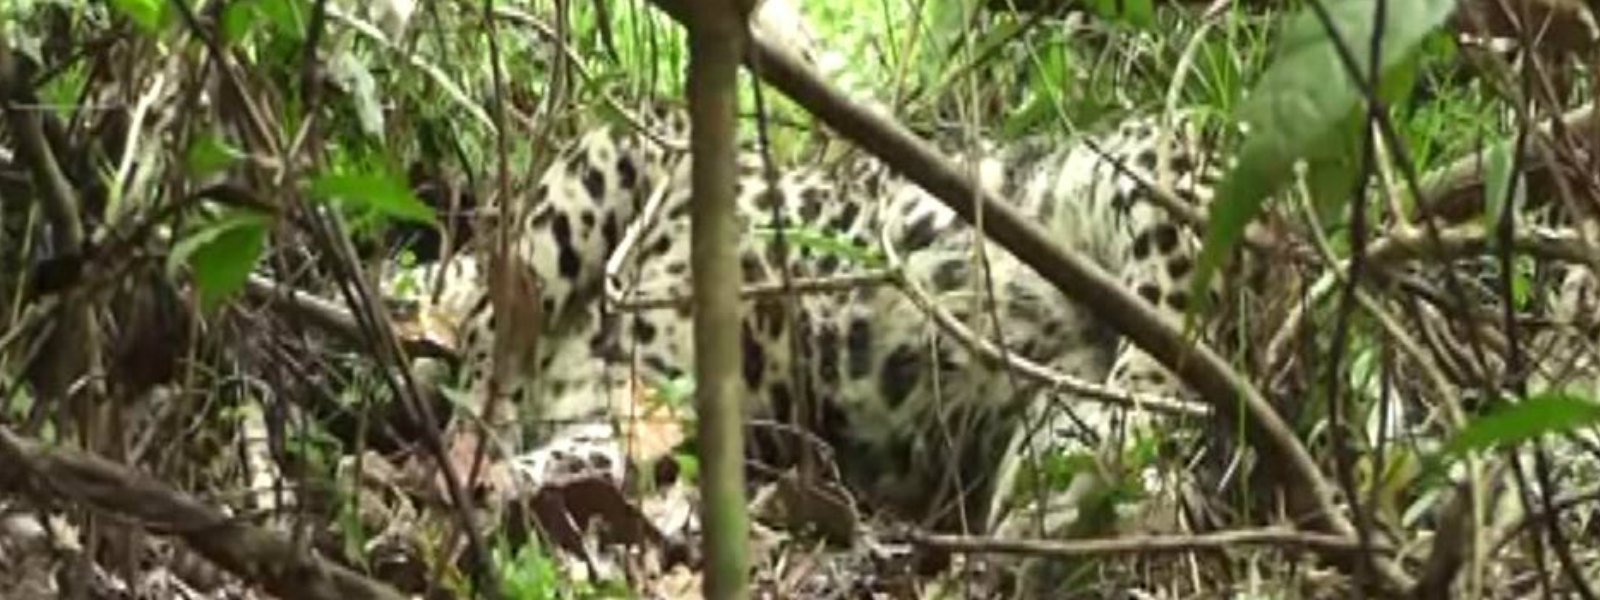 Leopards at risk due to snare traps